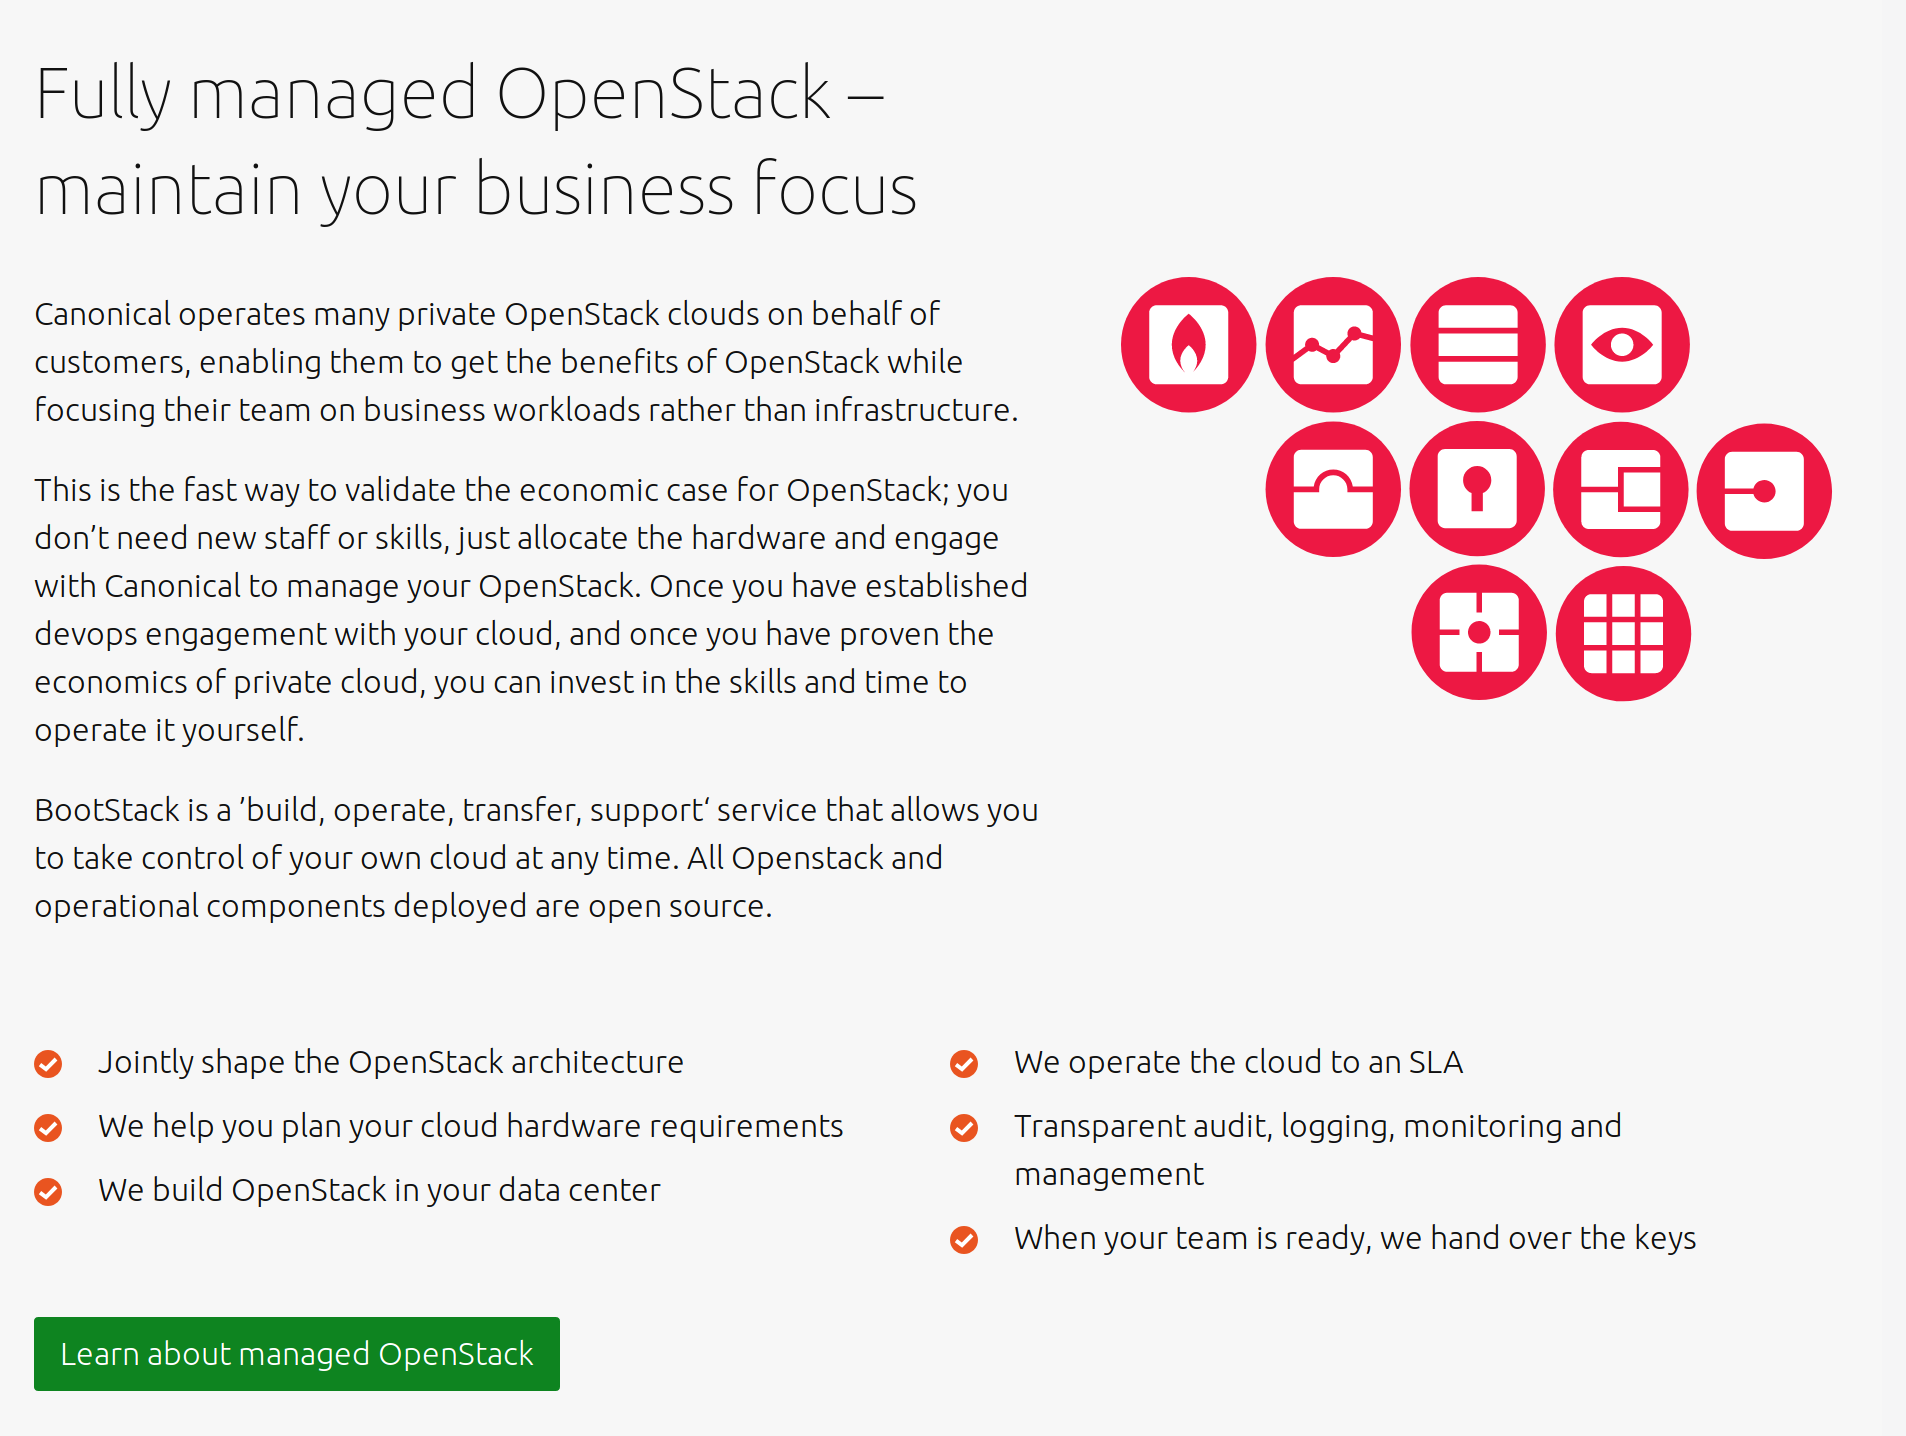 Managed OpenStack from Canonical